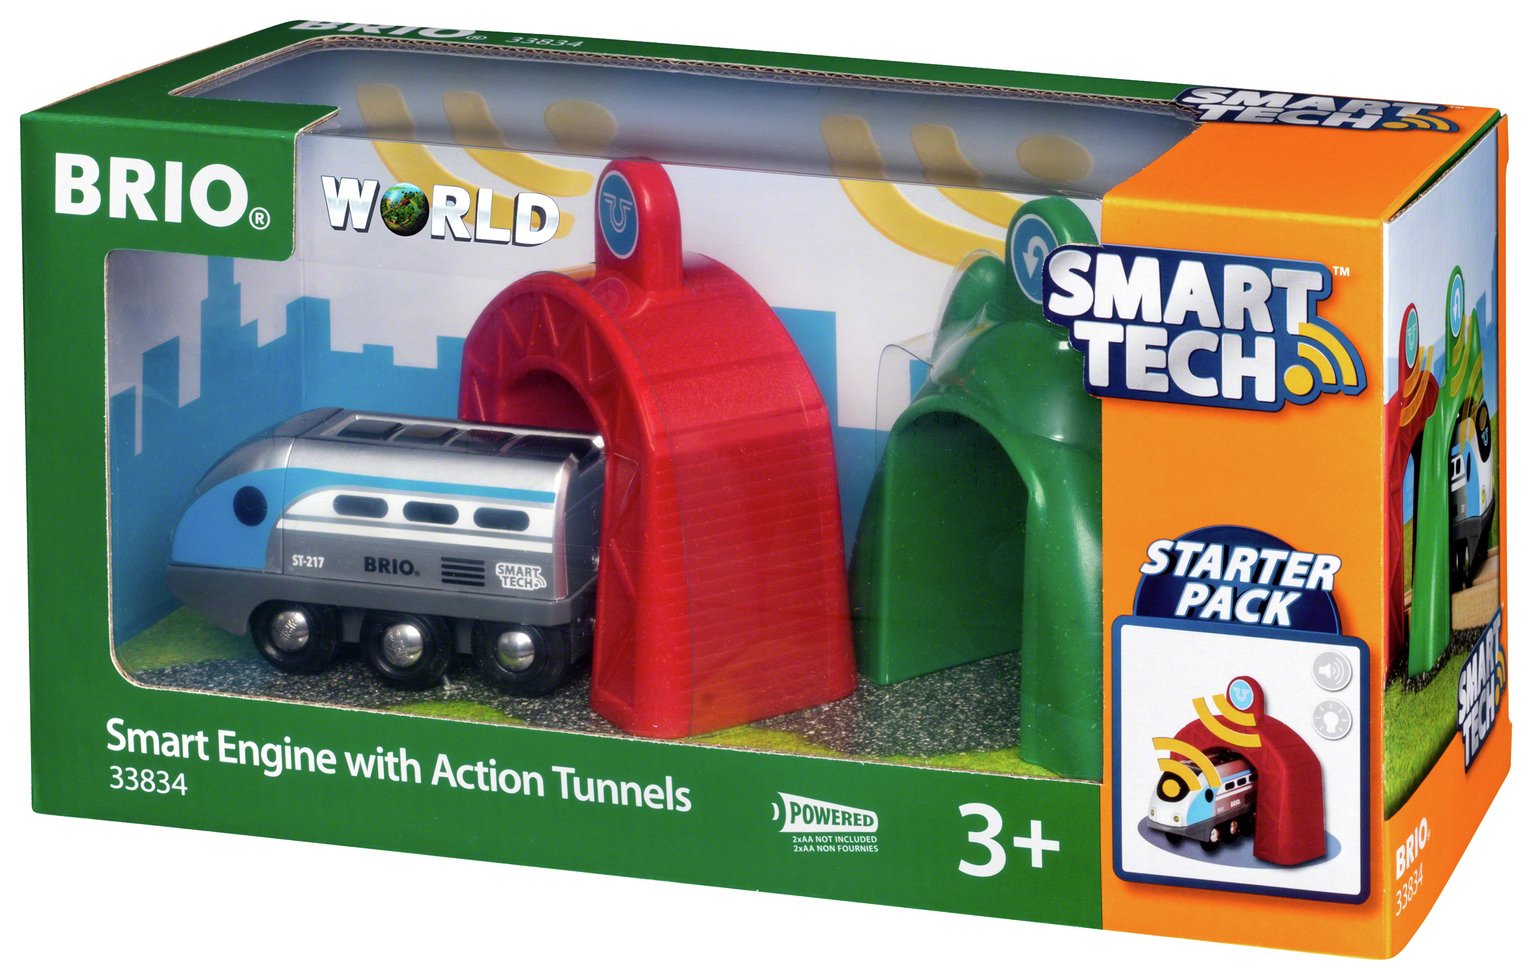 best place to buy brio trains